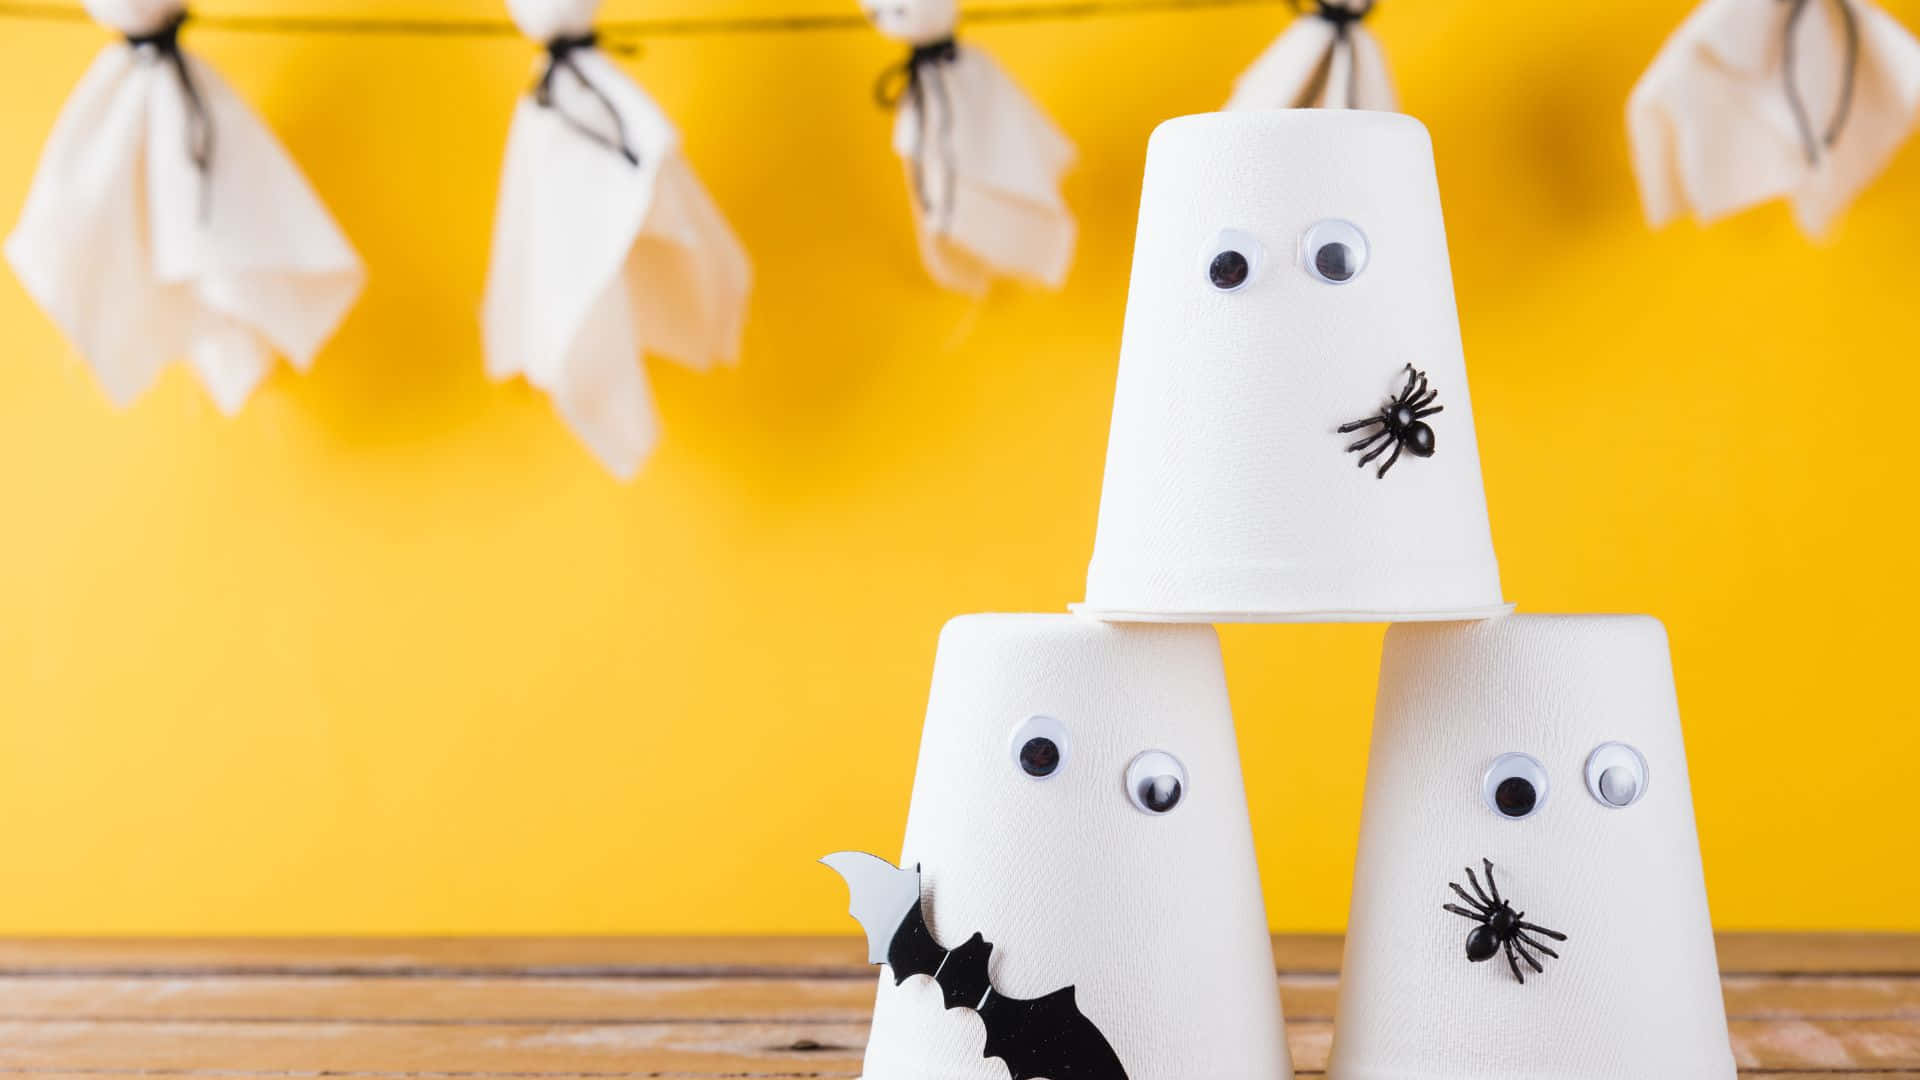 Create Festive Halloween Crafts with these Fun Ideas! Wallpaper